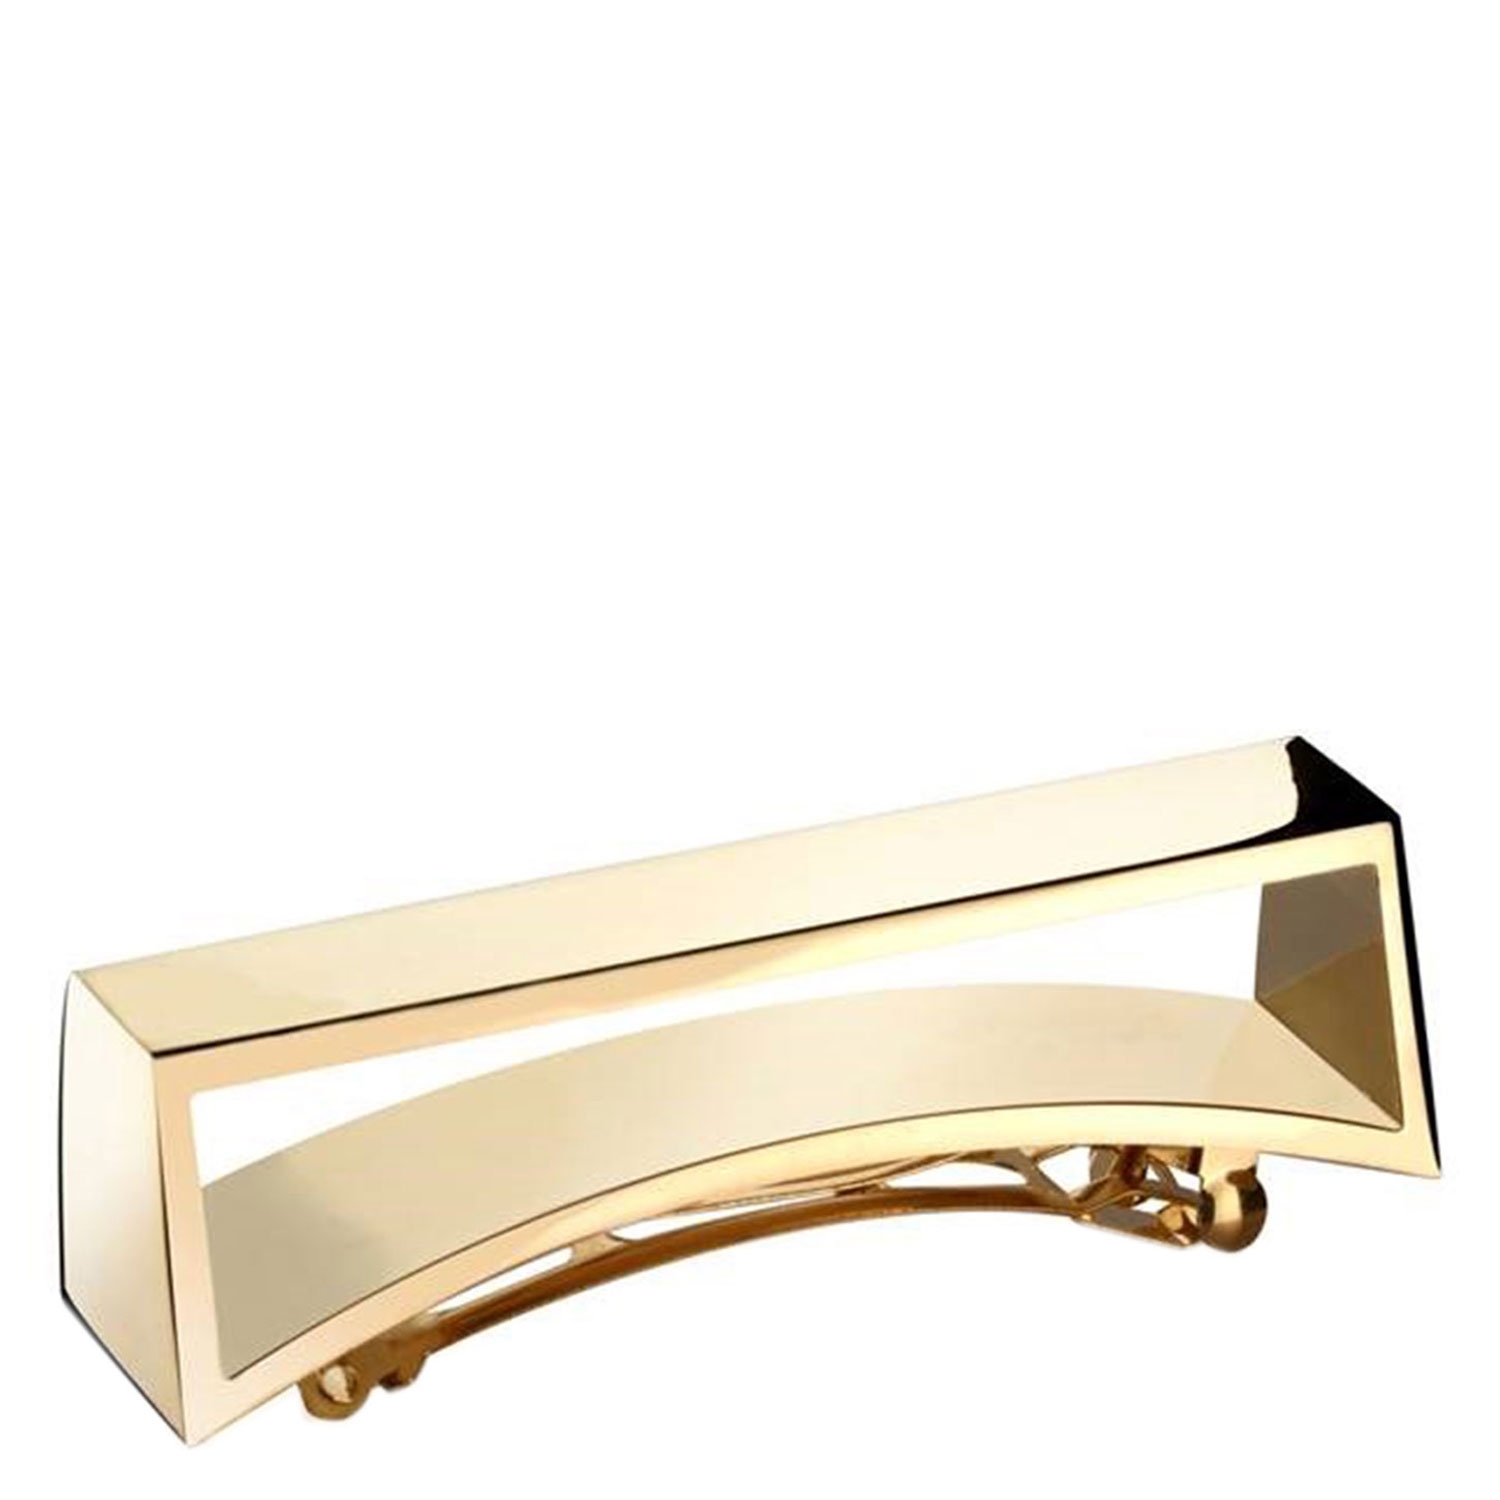 Product image from Oribe Accessories - Barrette